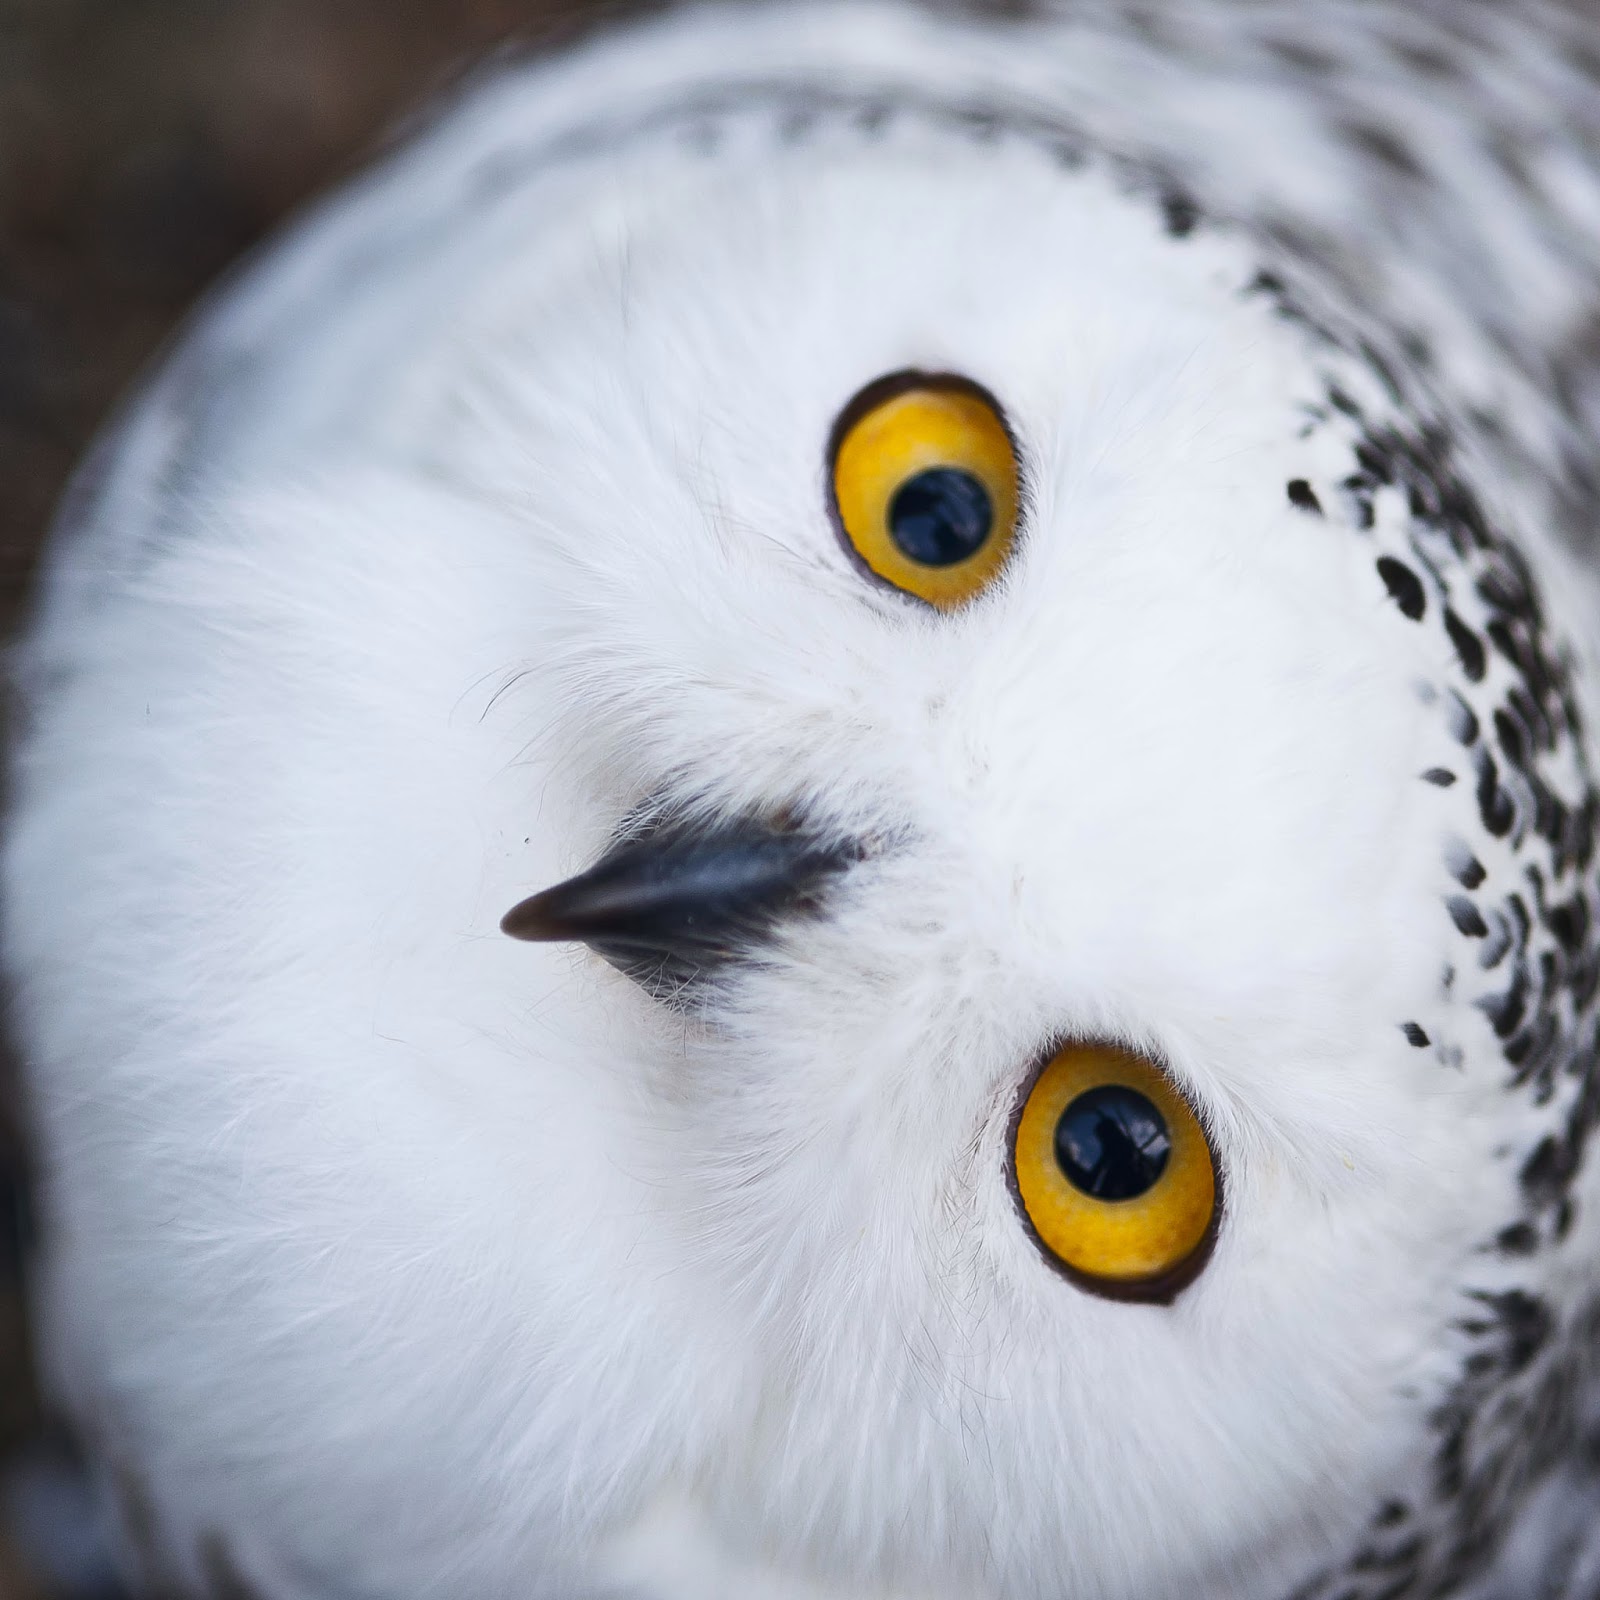 Cute Snowy Owls Images amp Pictures   Becuo